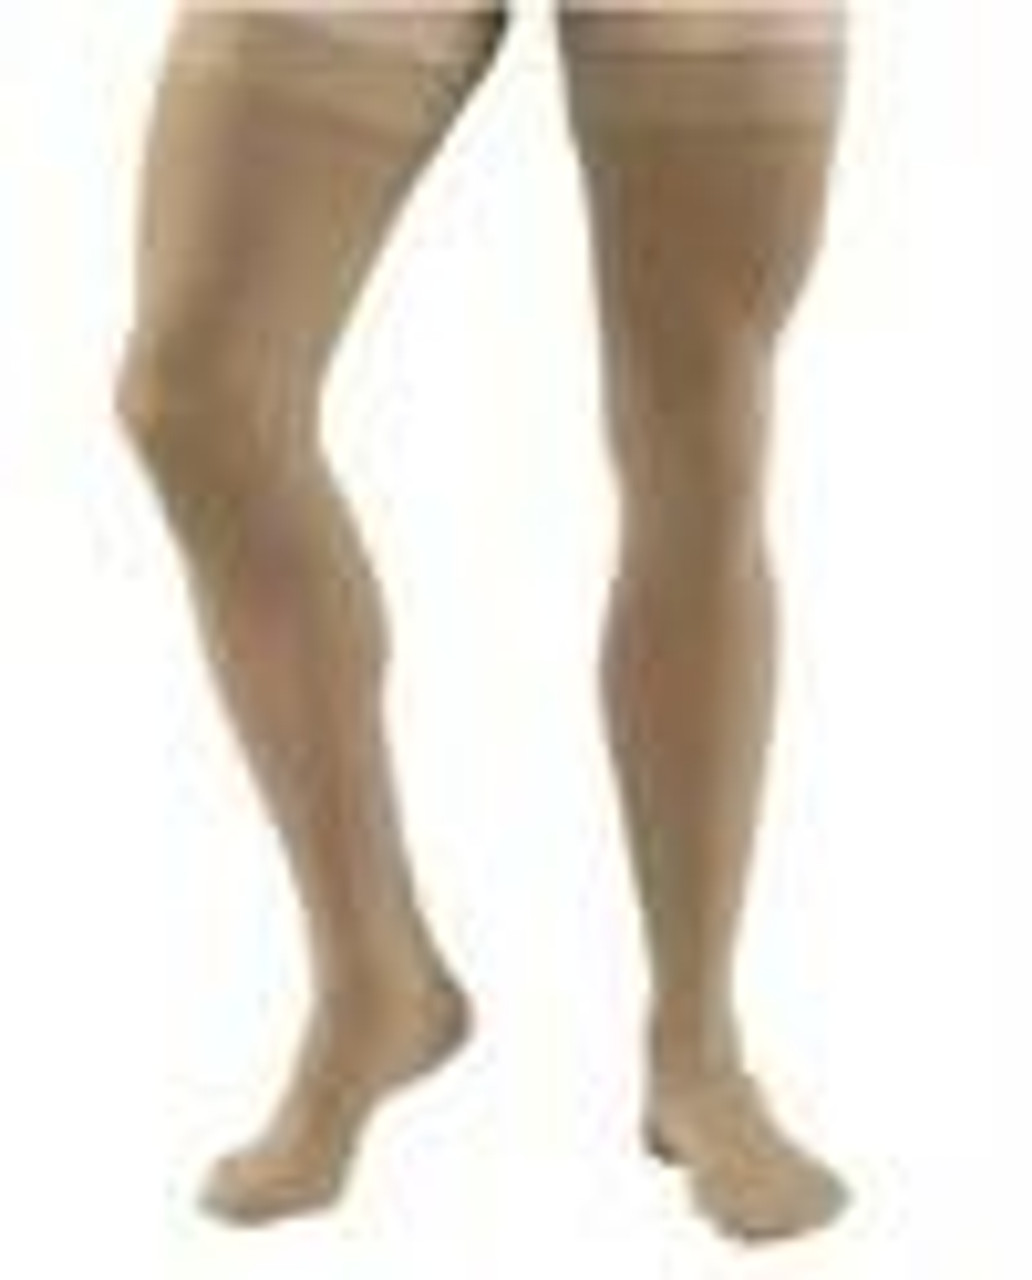 JOBST Relief Thigh High Stocking